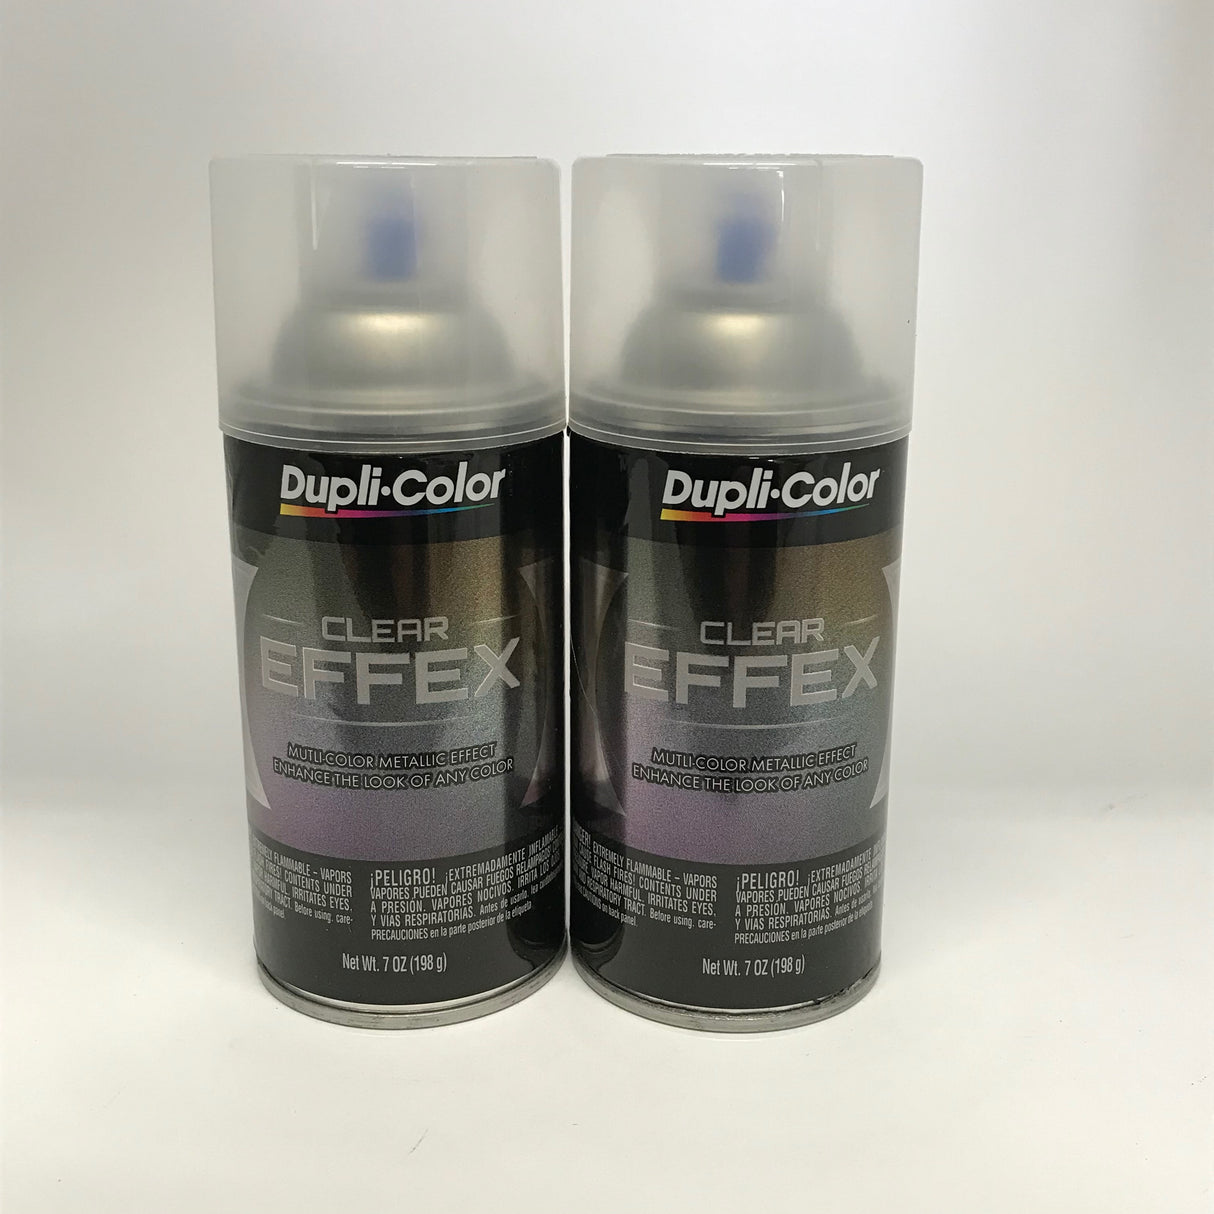 Duplicolor EFX100 - 2 Pack Clear Effex Paint, Color Changing Glitter Effect - 7oz